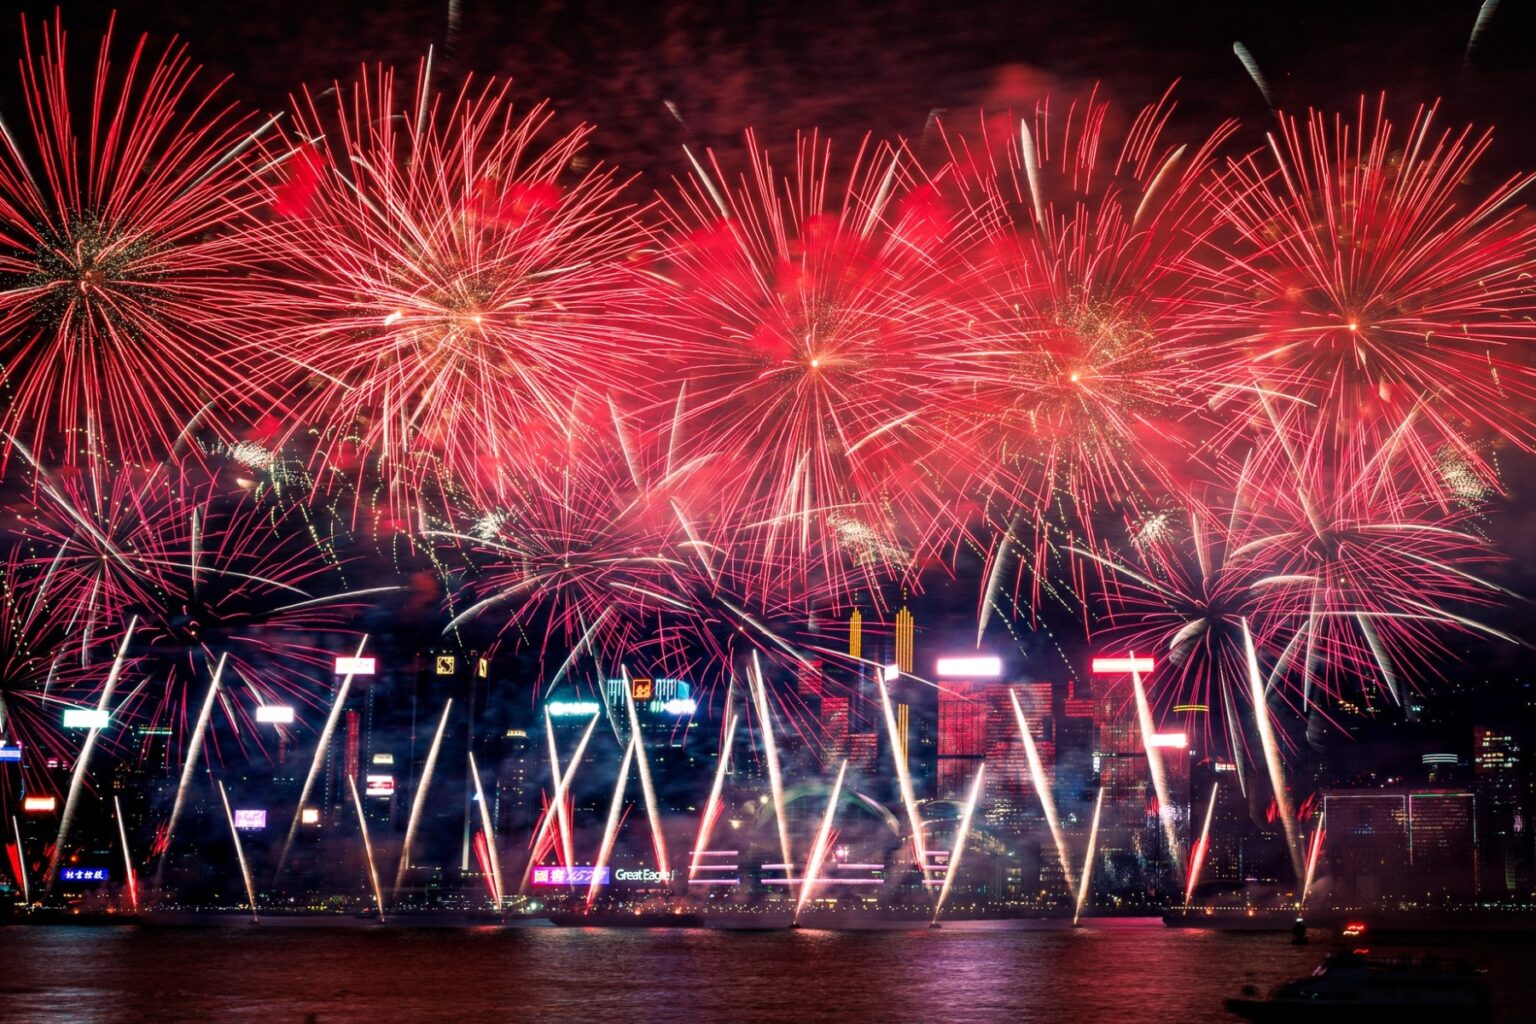 hong kong lunar new year fireworks back after 5 years